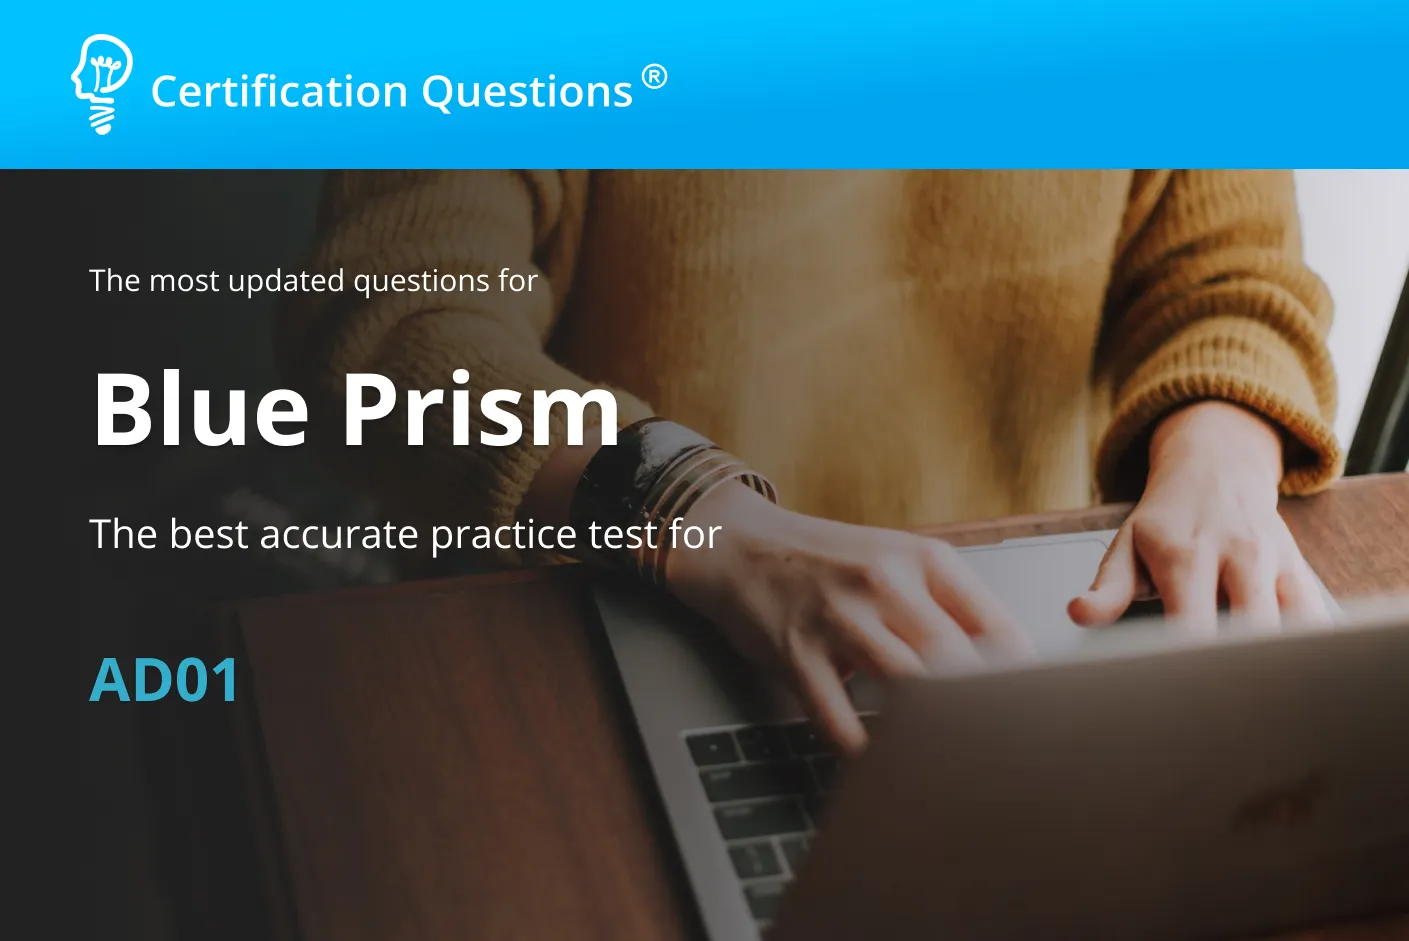 This image is related to blue prism ad01 practice test in USA